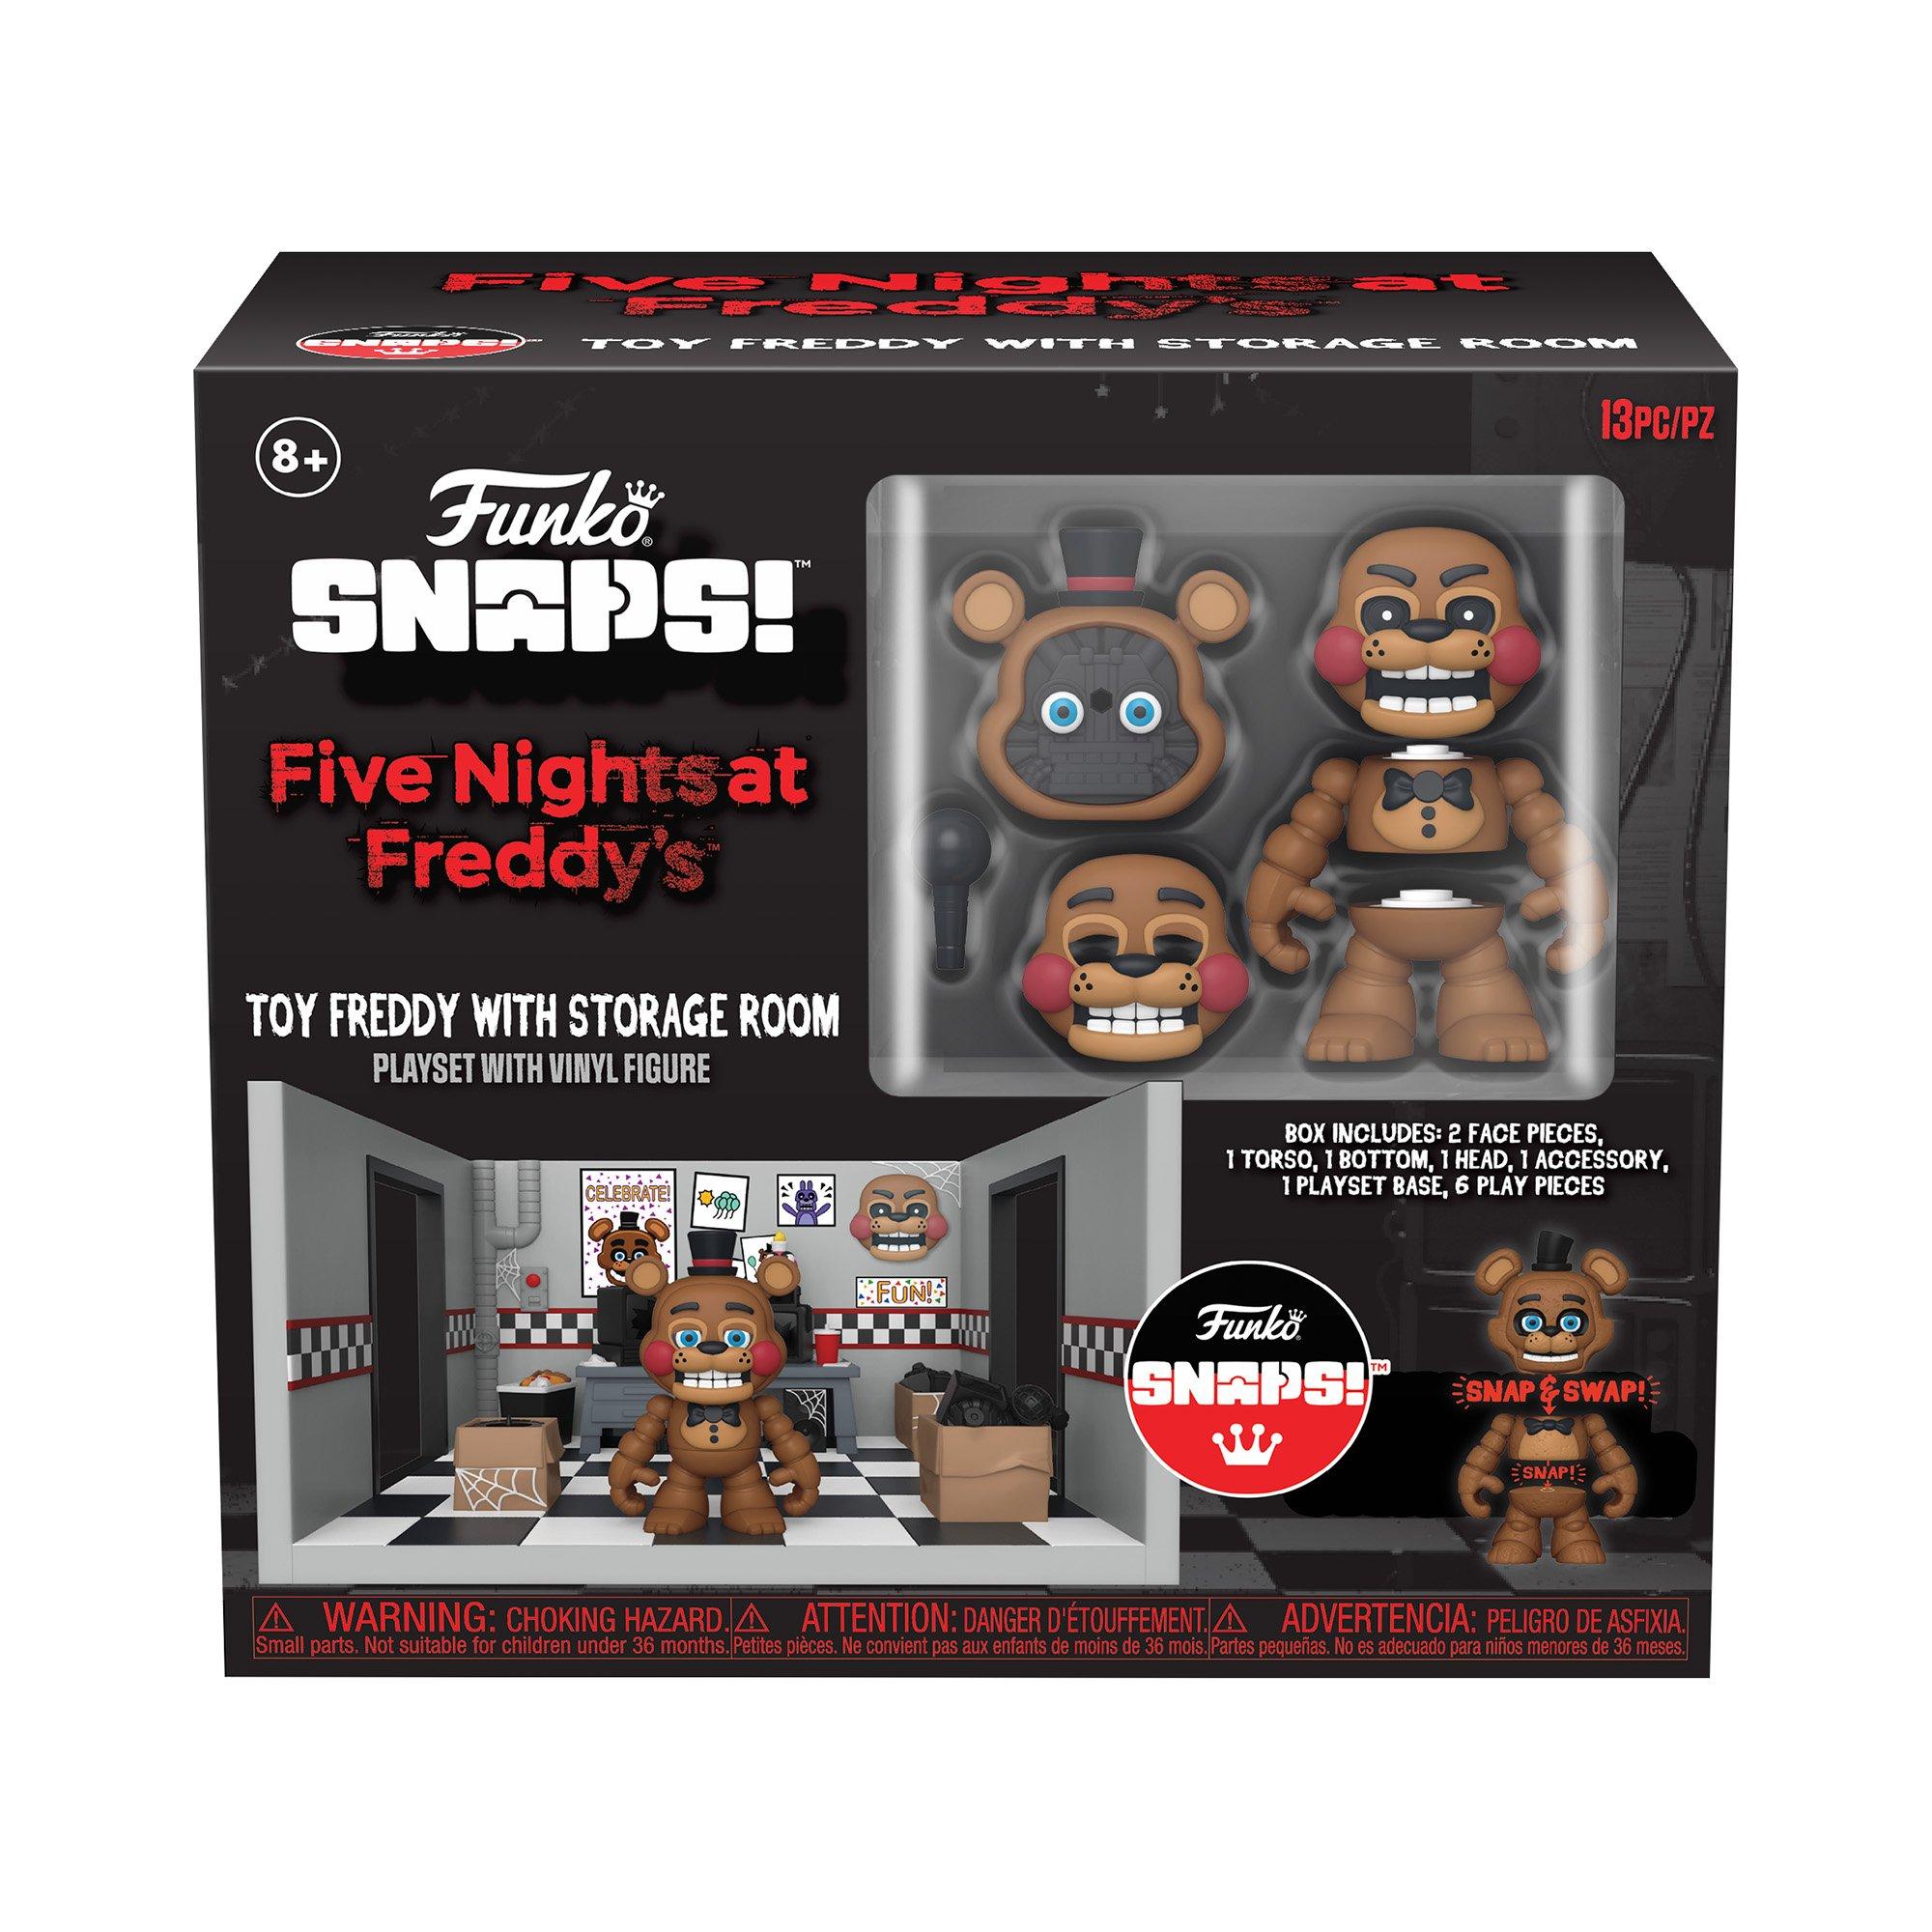 Five Nights at Freddy's Security Room Snap Playset